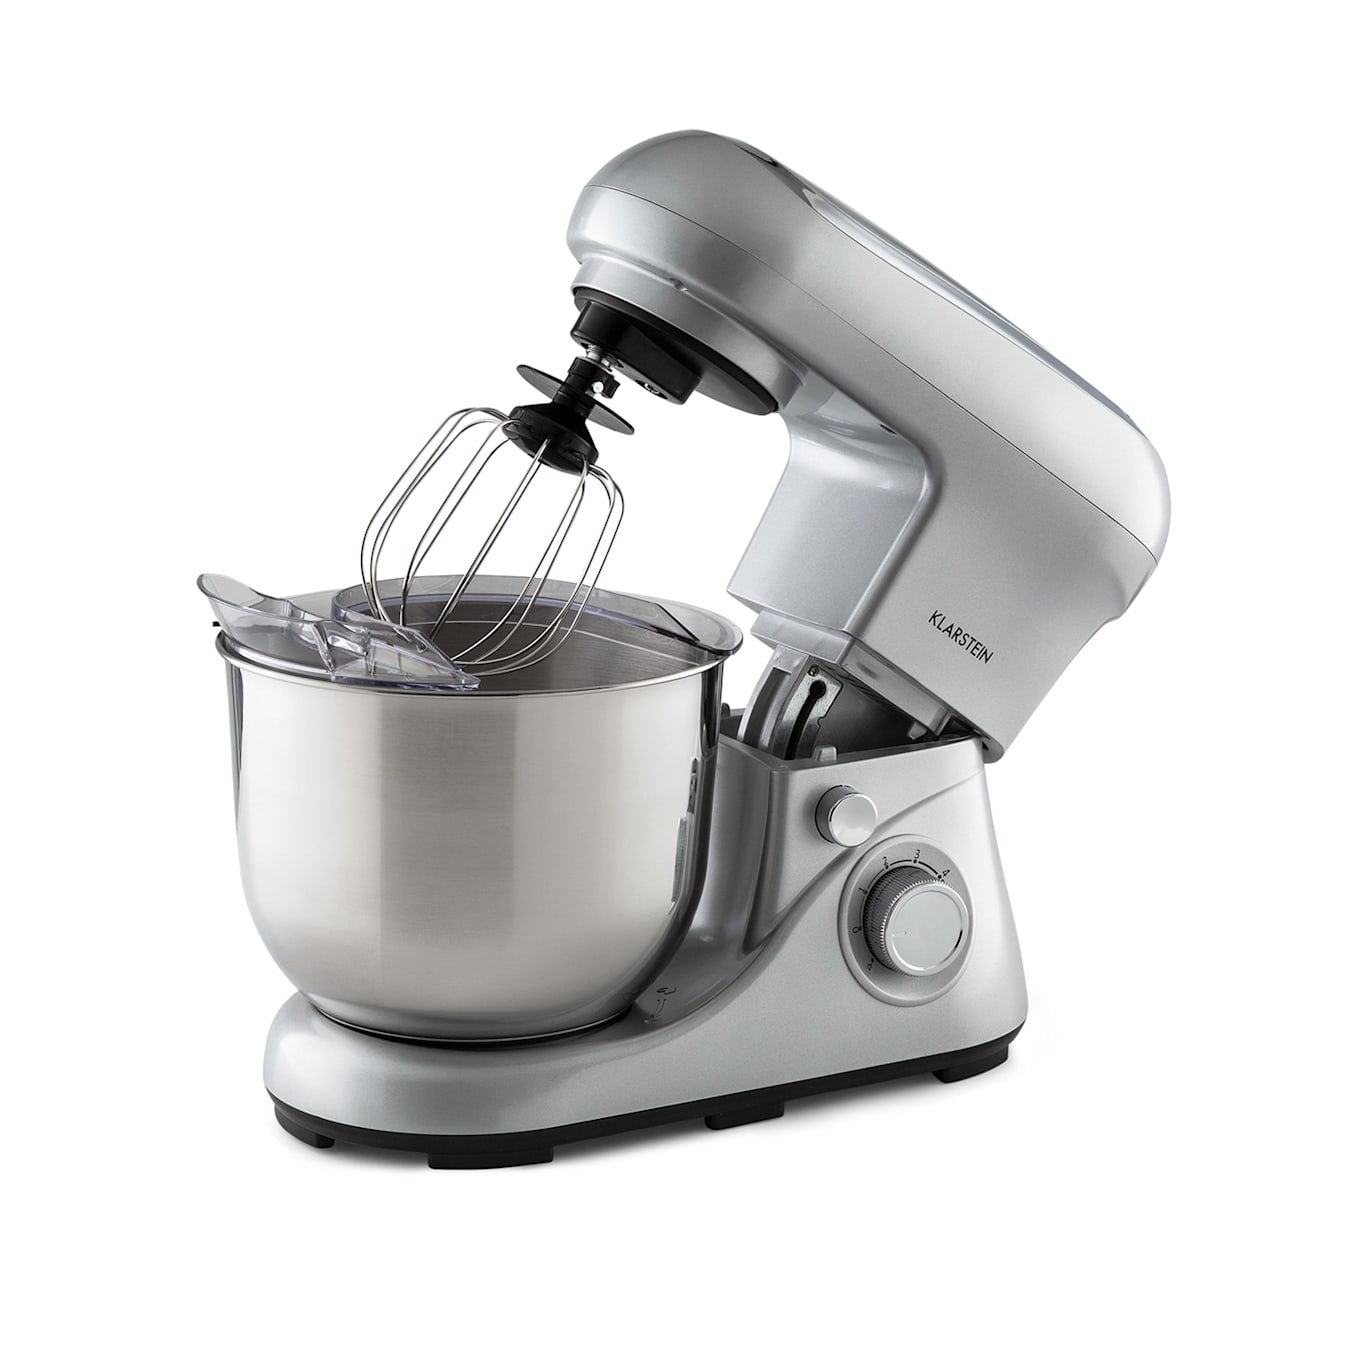 Ina Garten Loves Her KitchenAid Mixer—Score One Now at the Lowest Price  We've Seen in Months